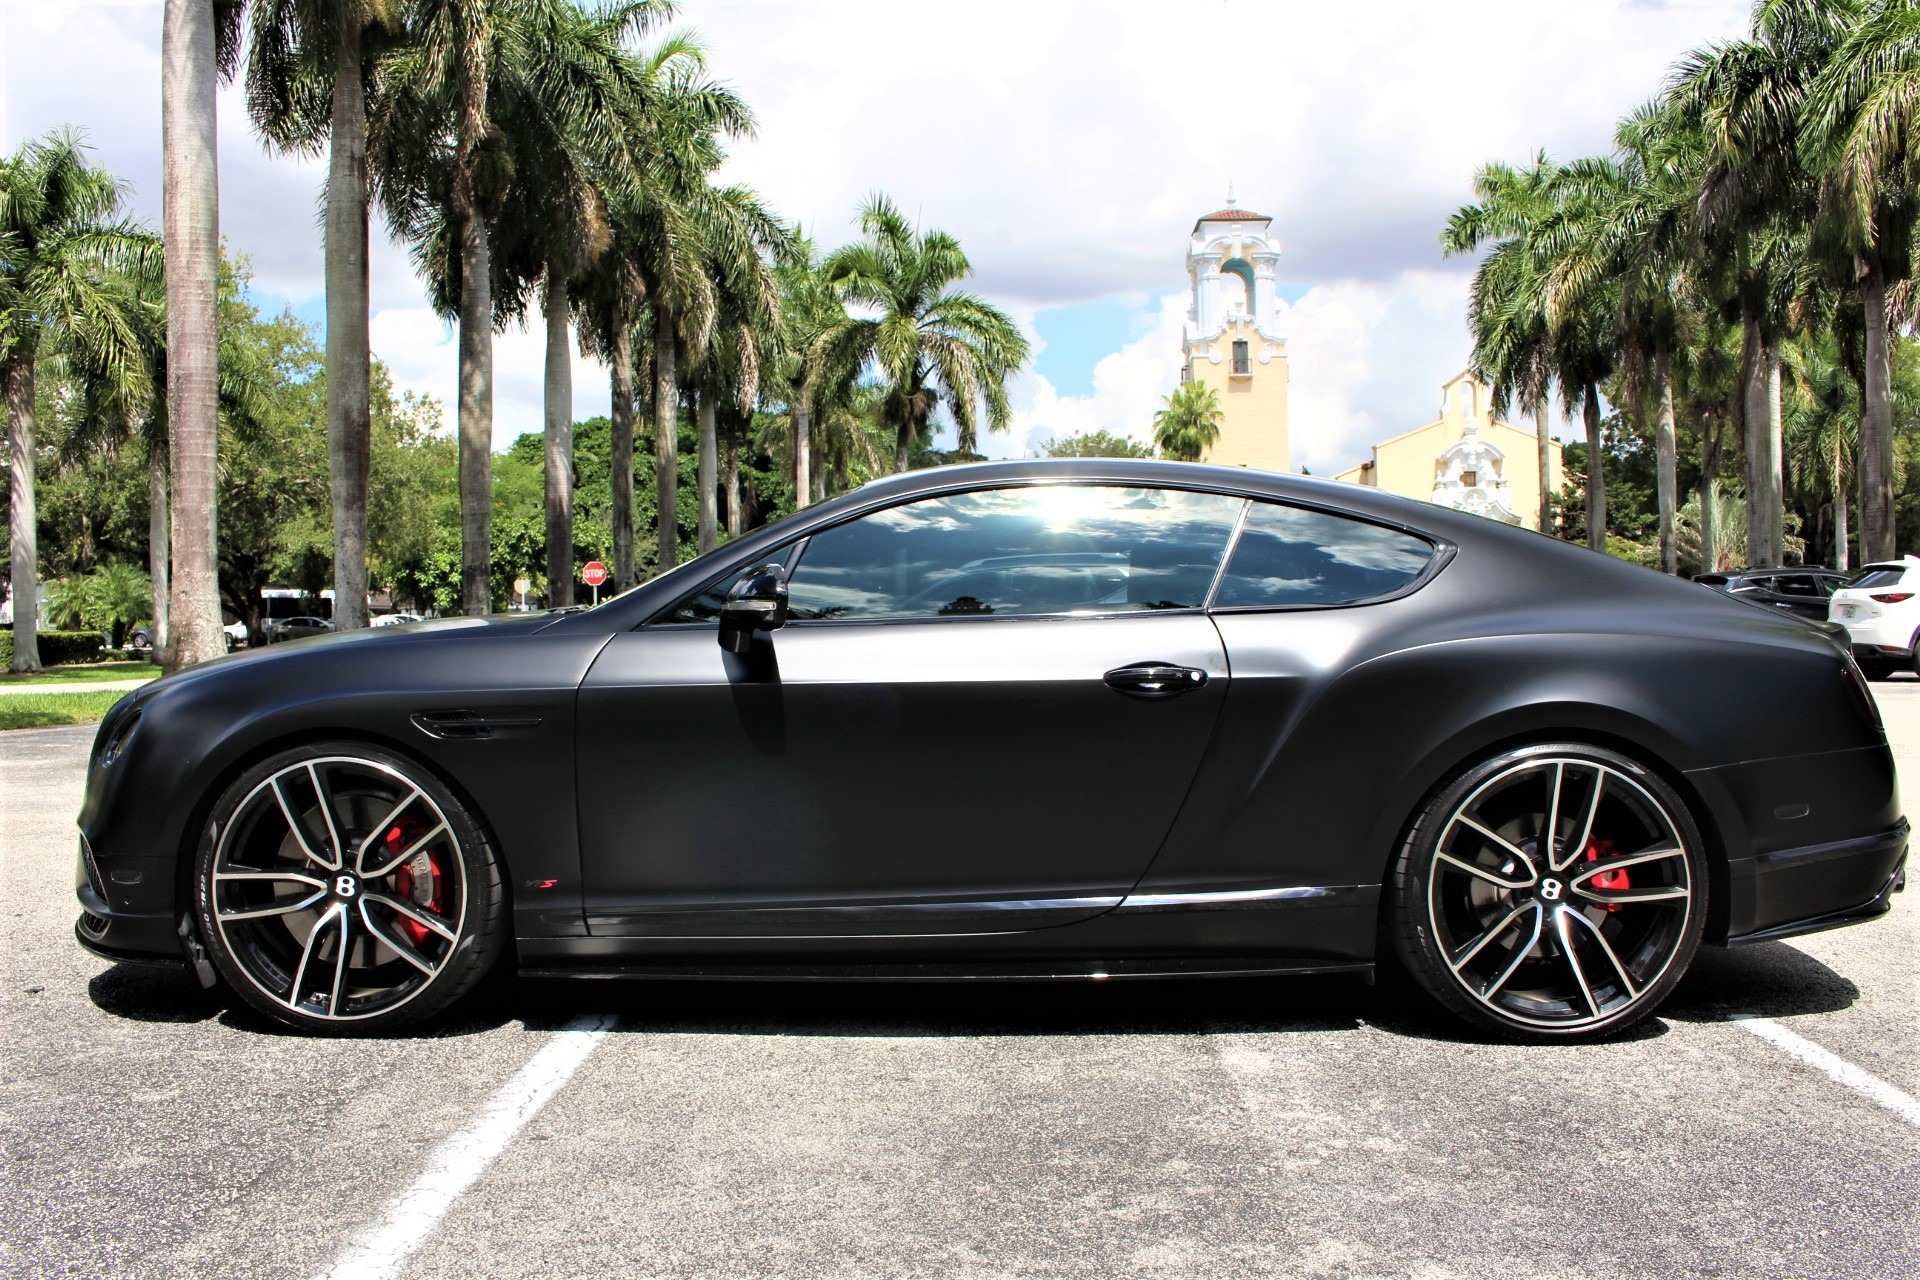 Used 2016 Bentley Continental GT V8 S for sale Sold at The Gables Sports Cars in Miami FL 33146 3